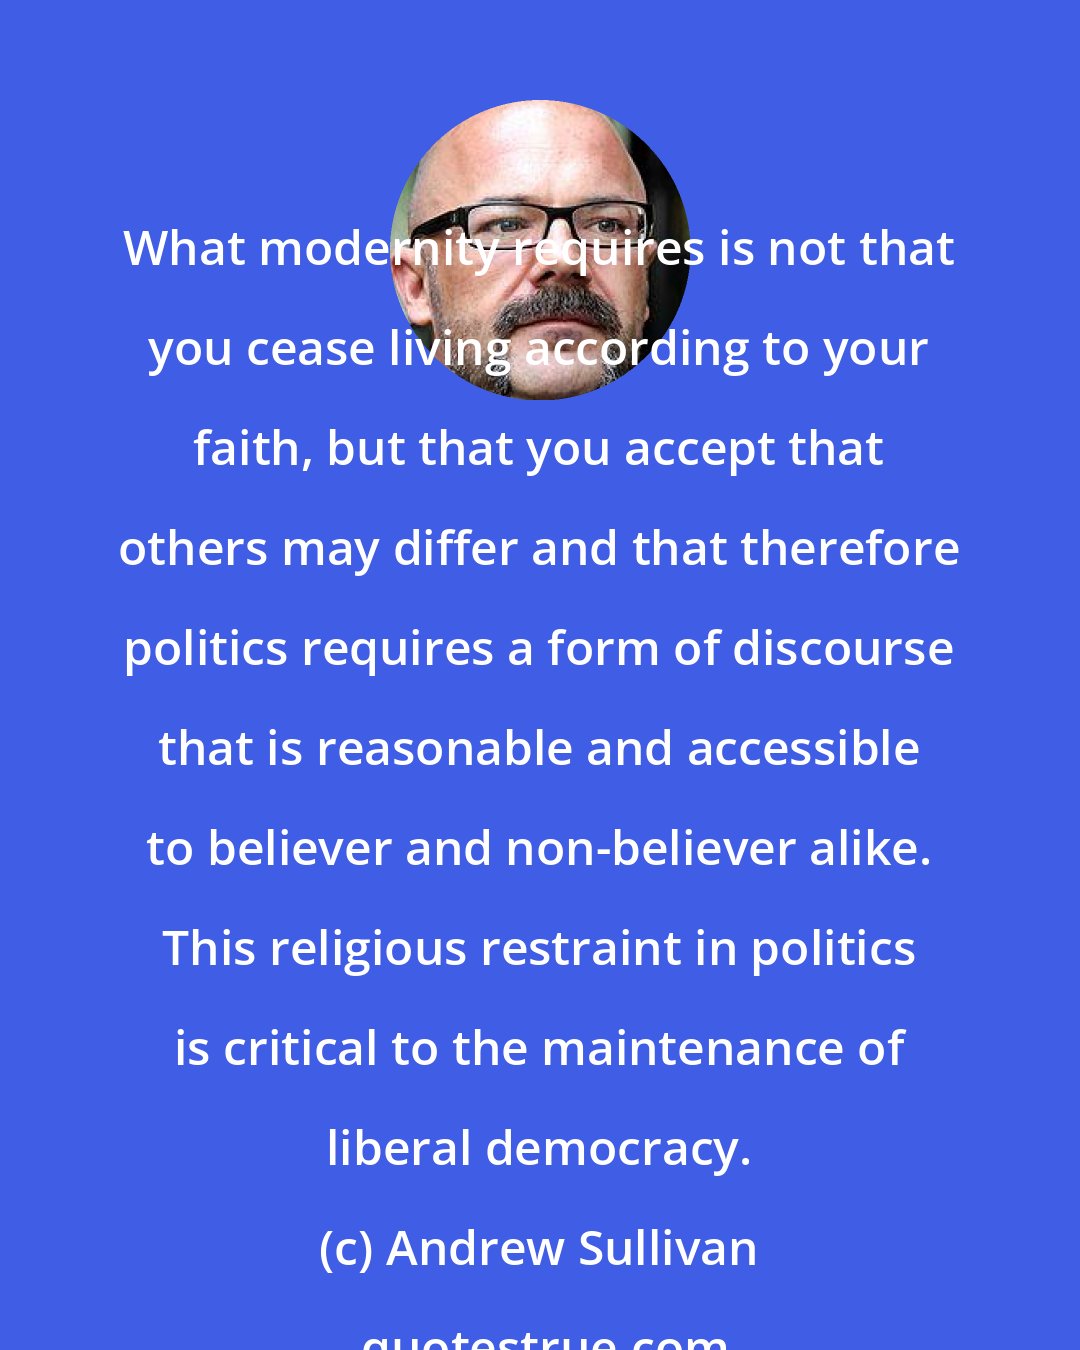 Andrew Sullivan: What modernity requires is not that you cease living according to your faith, but that you accept that others may differ and that therefore politics requires a form of discourse that is reasonable and accessible to believer and non-believer alike. This religious restraint in politics is critical to the maintenance of liberal democracy.